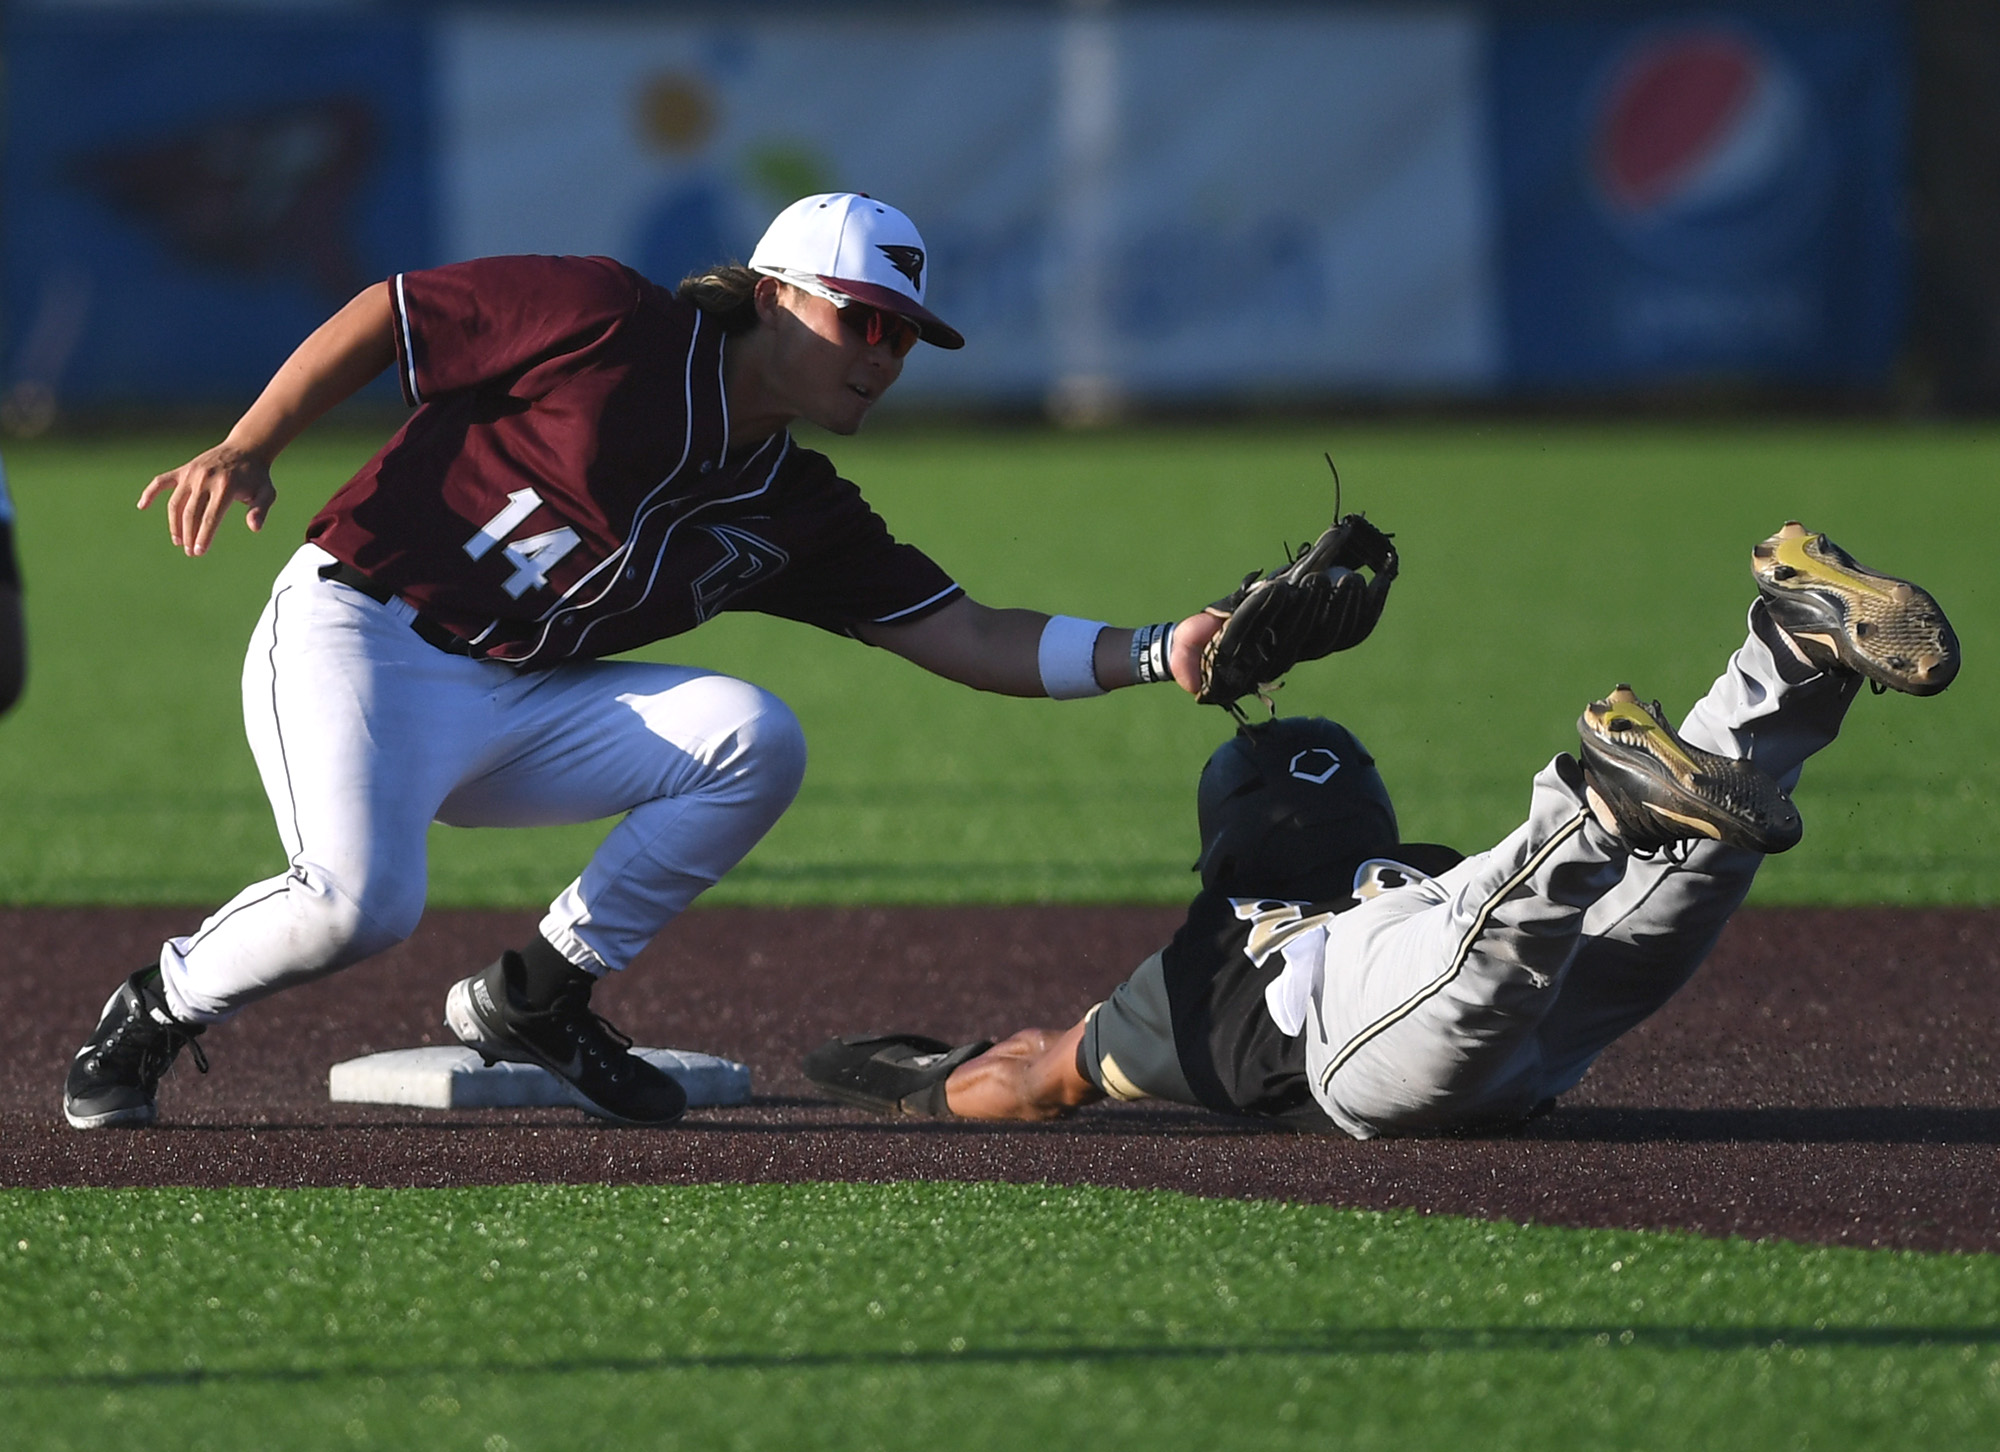 Raptors infielder Jake Tsukada, left, tags out a Bend baserunner Tuesday, July 26, 2022, during a game between Ridgefield and the Bend Elks at the Ridgefield Outdoor Recreation Complex.